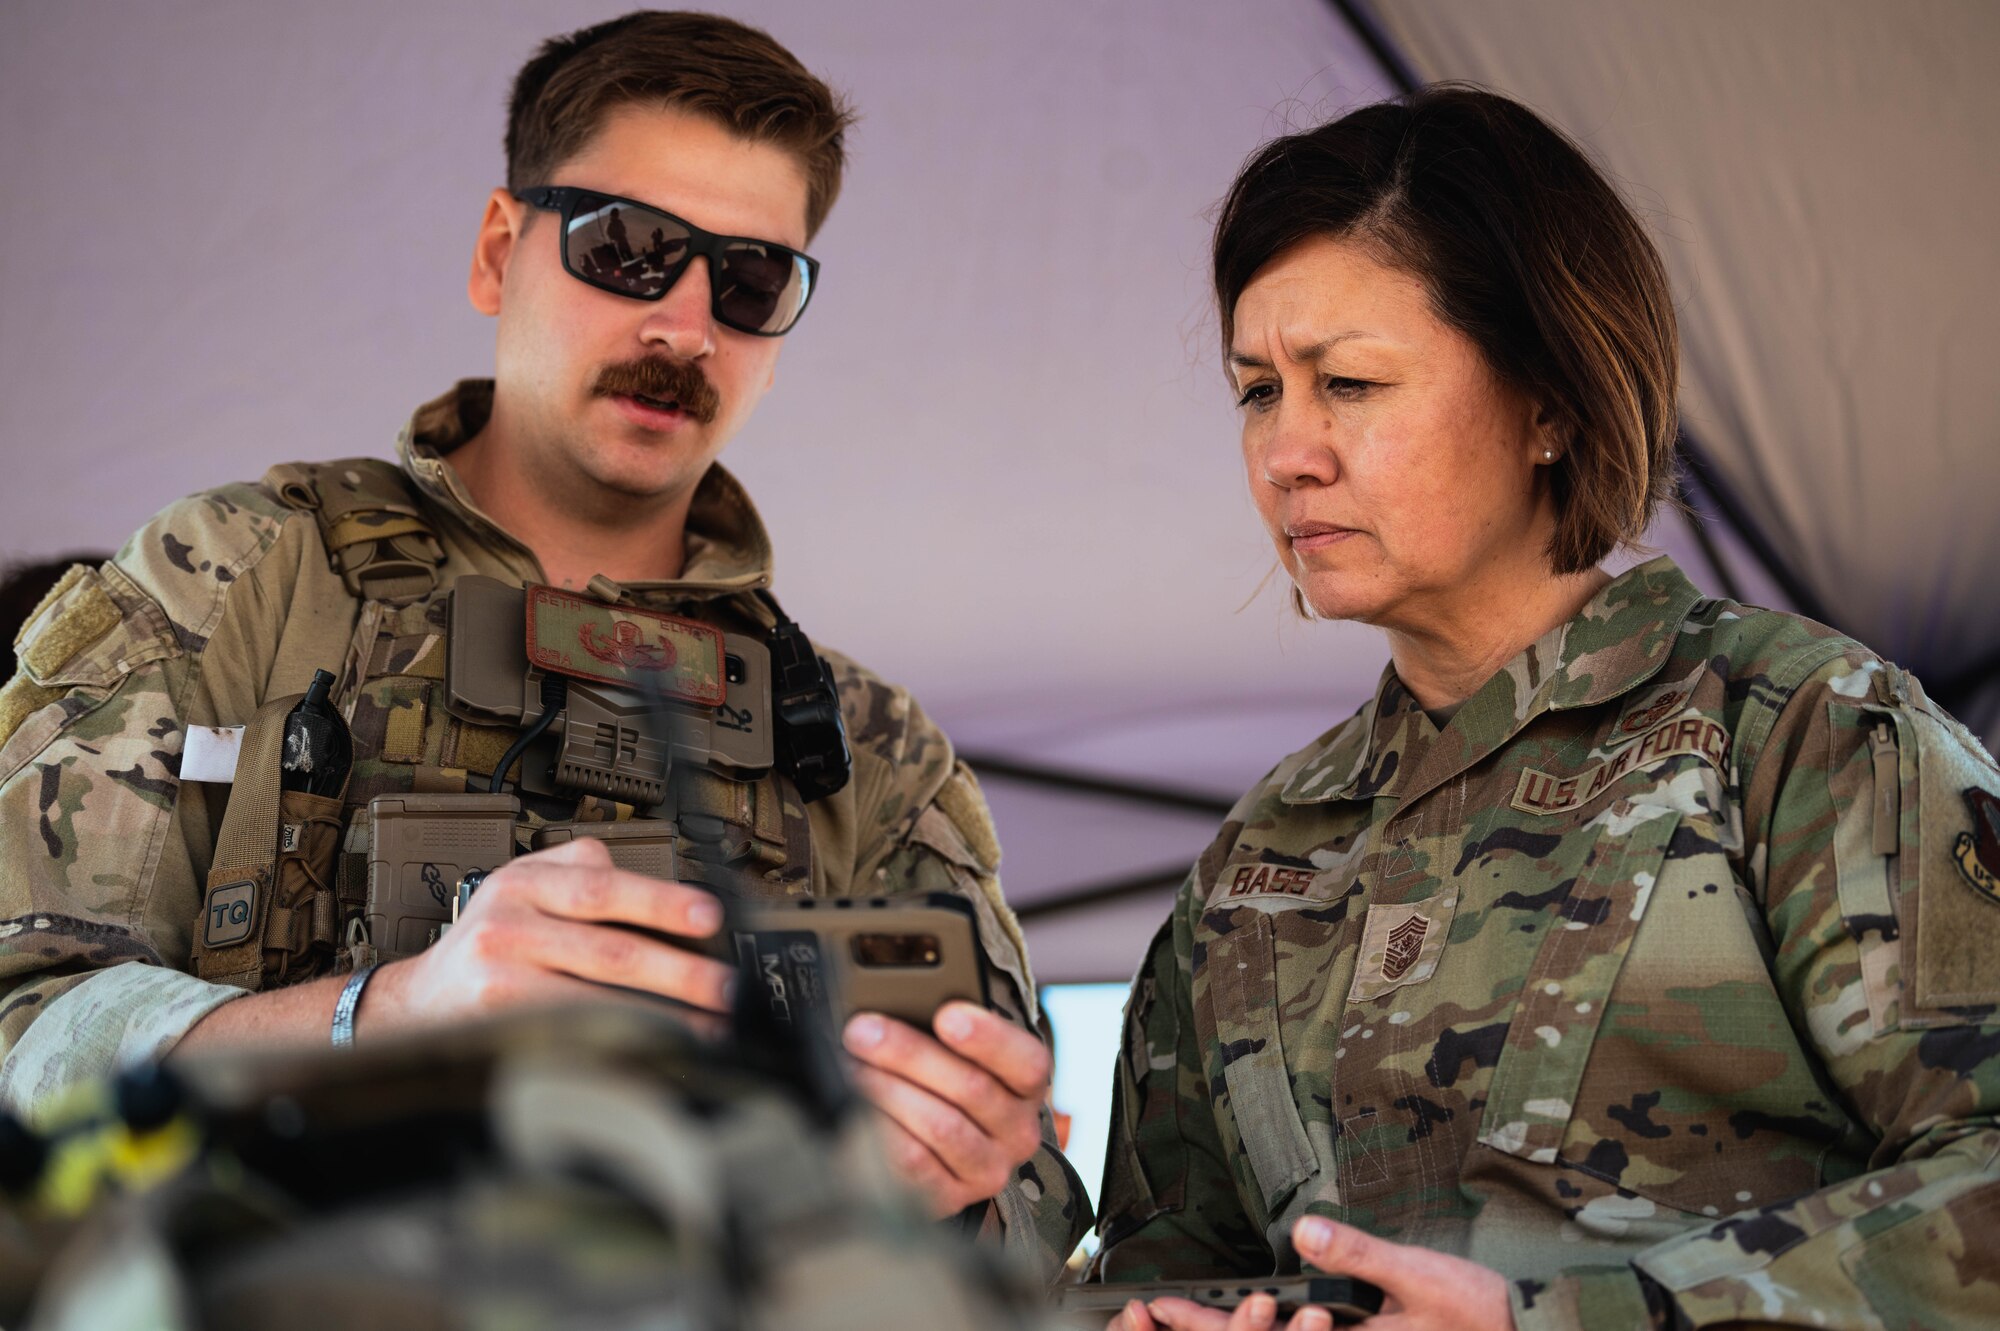 Chief Master Sgt. of the Air Force Joanne Bass (right), and an EOD technician from the 56th Civil Engineer Squadron (left) view Android Team Awareness Kit (ATAK) technology during her base tour